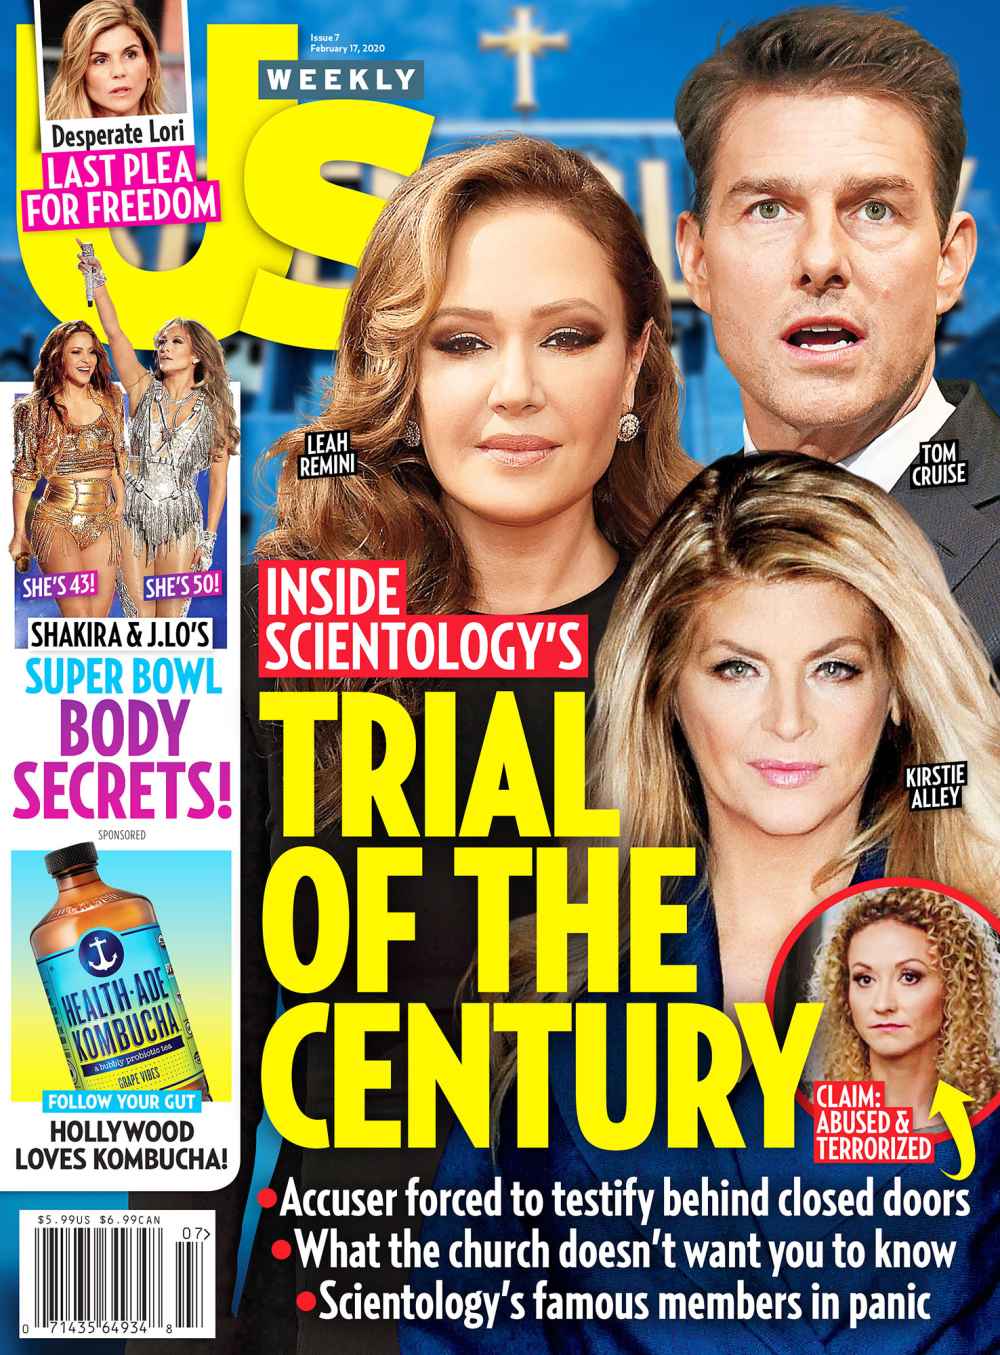 Us Weekly Cover Issue 0720 Scientology Lori Loughlin's Attorneys Are Going to Play 'Ignorance Card